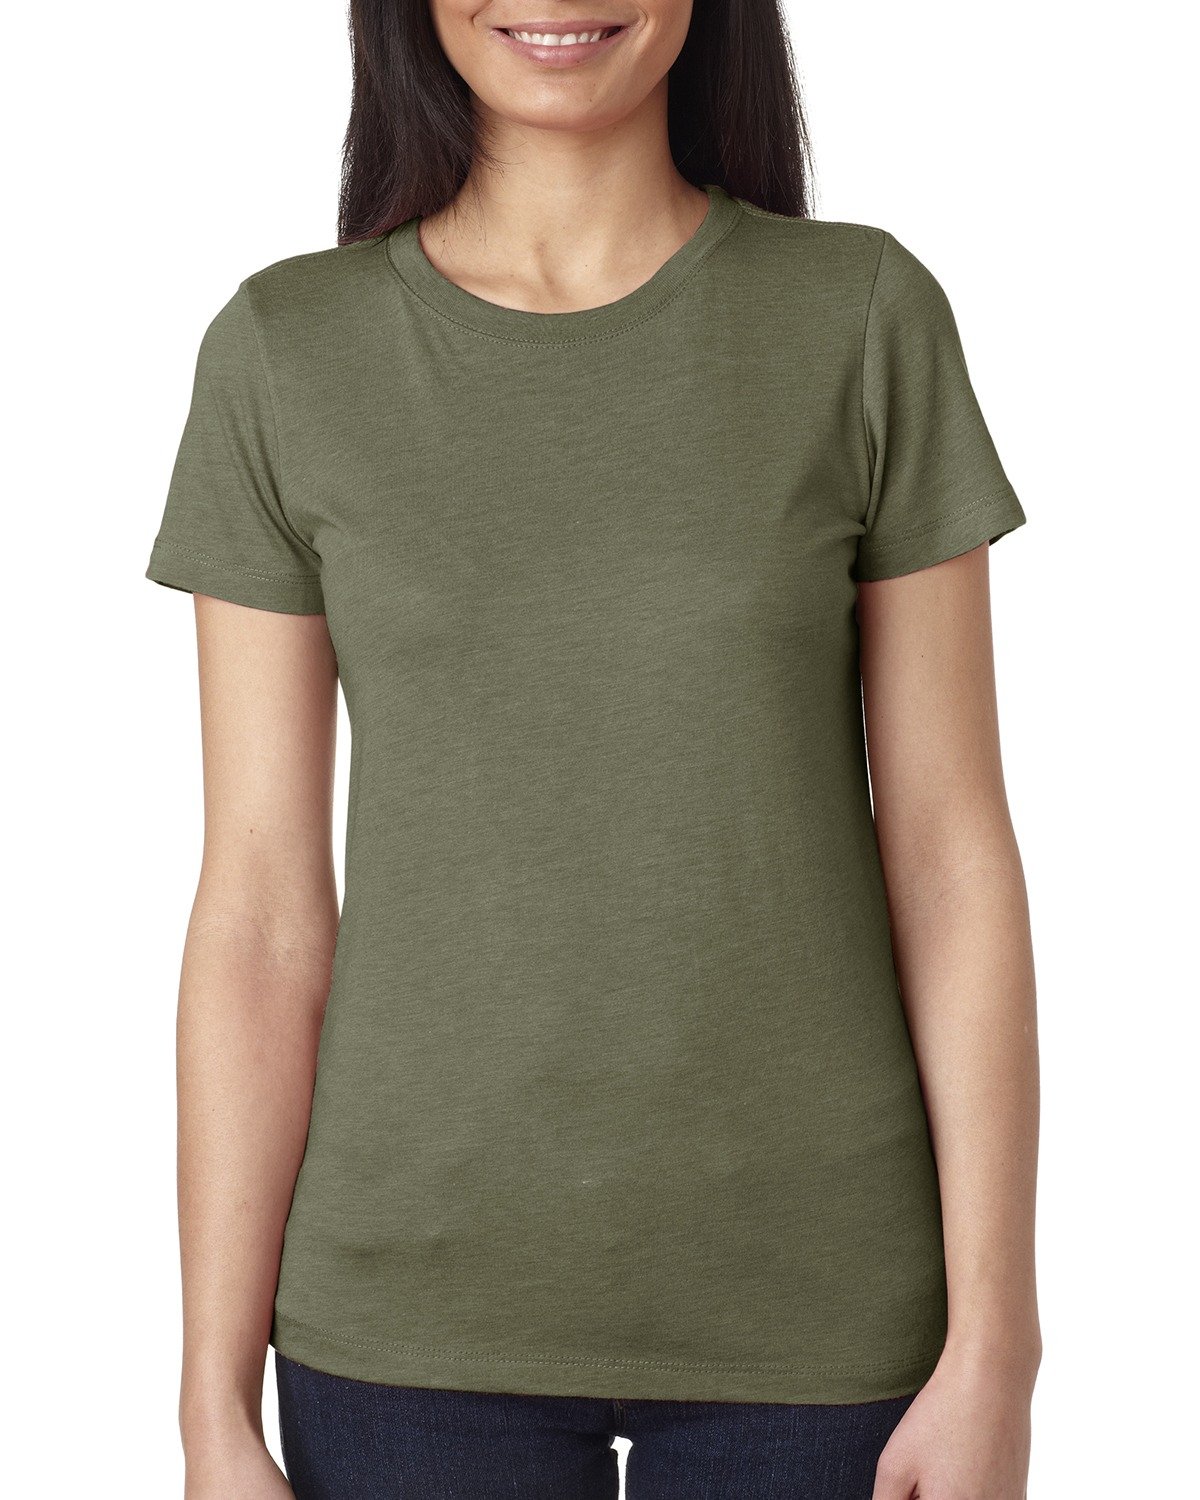 Selected Color is MILITARY GREEN